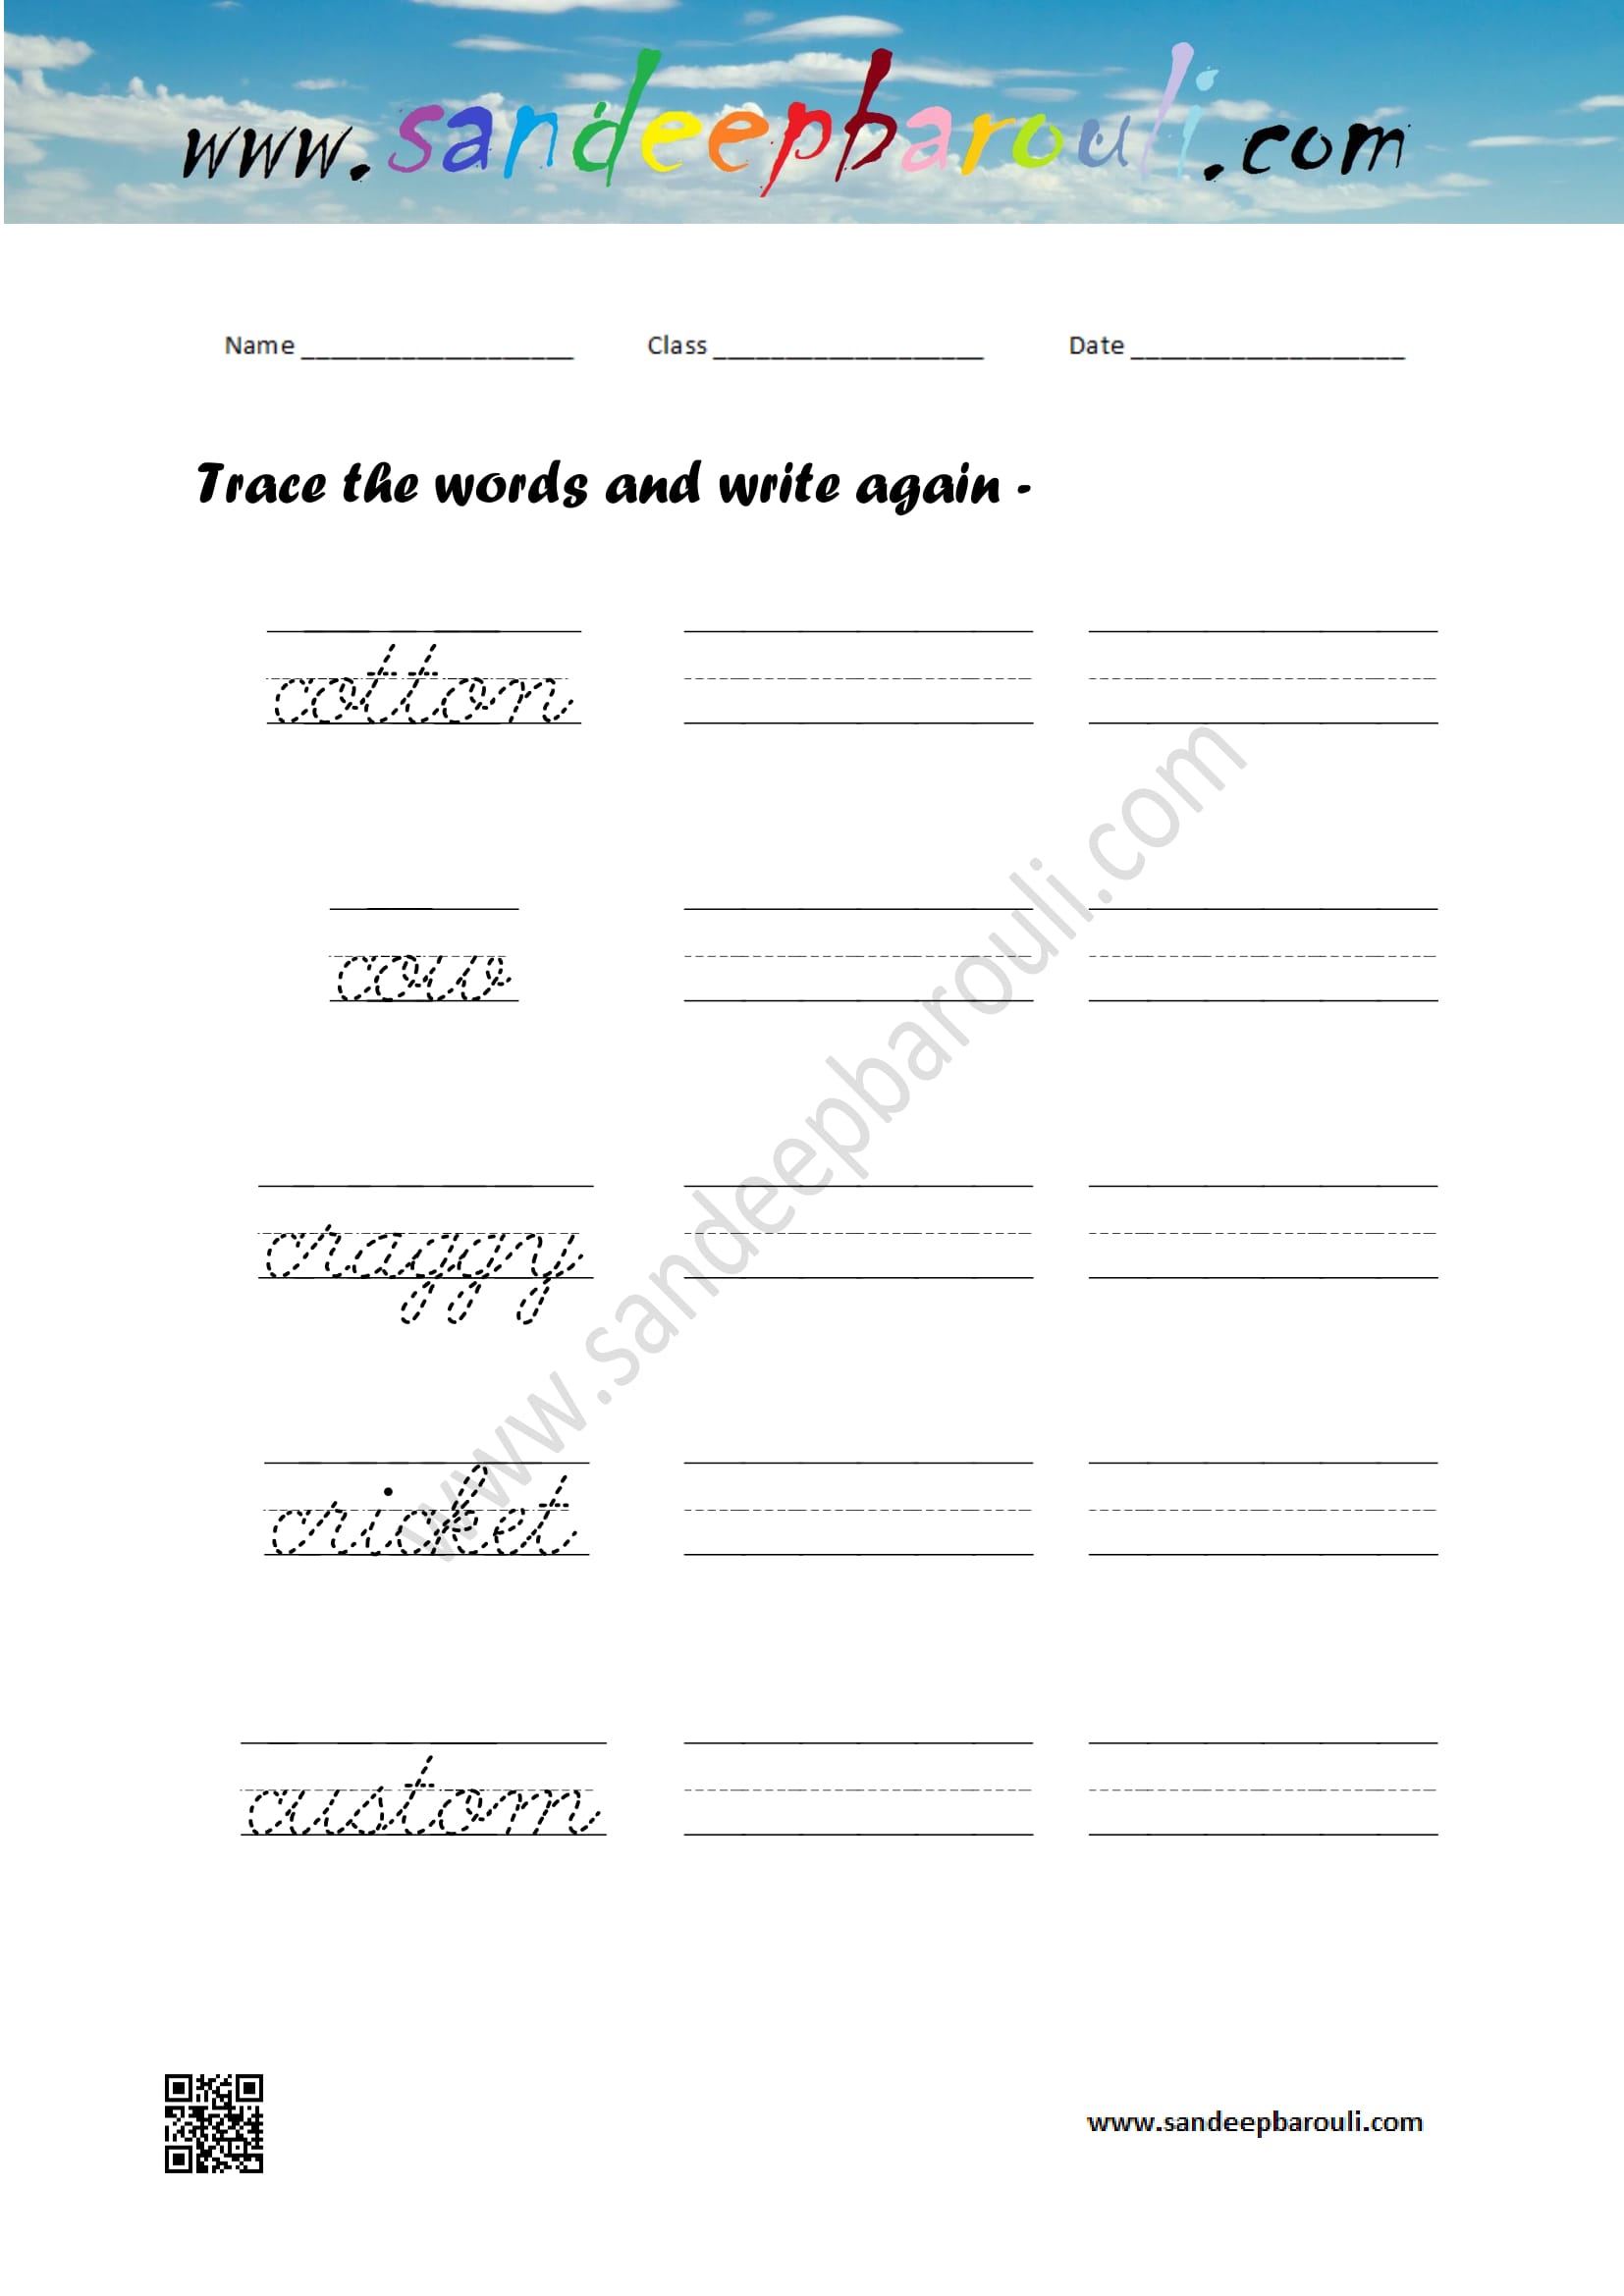 Cursive writing worksheet – trace the words and write again (120)